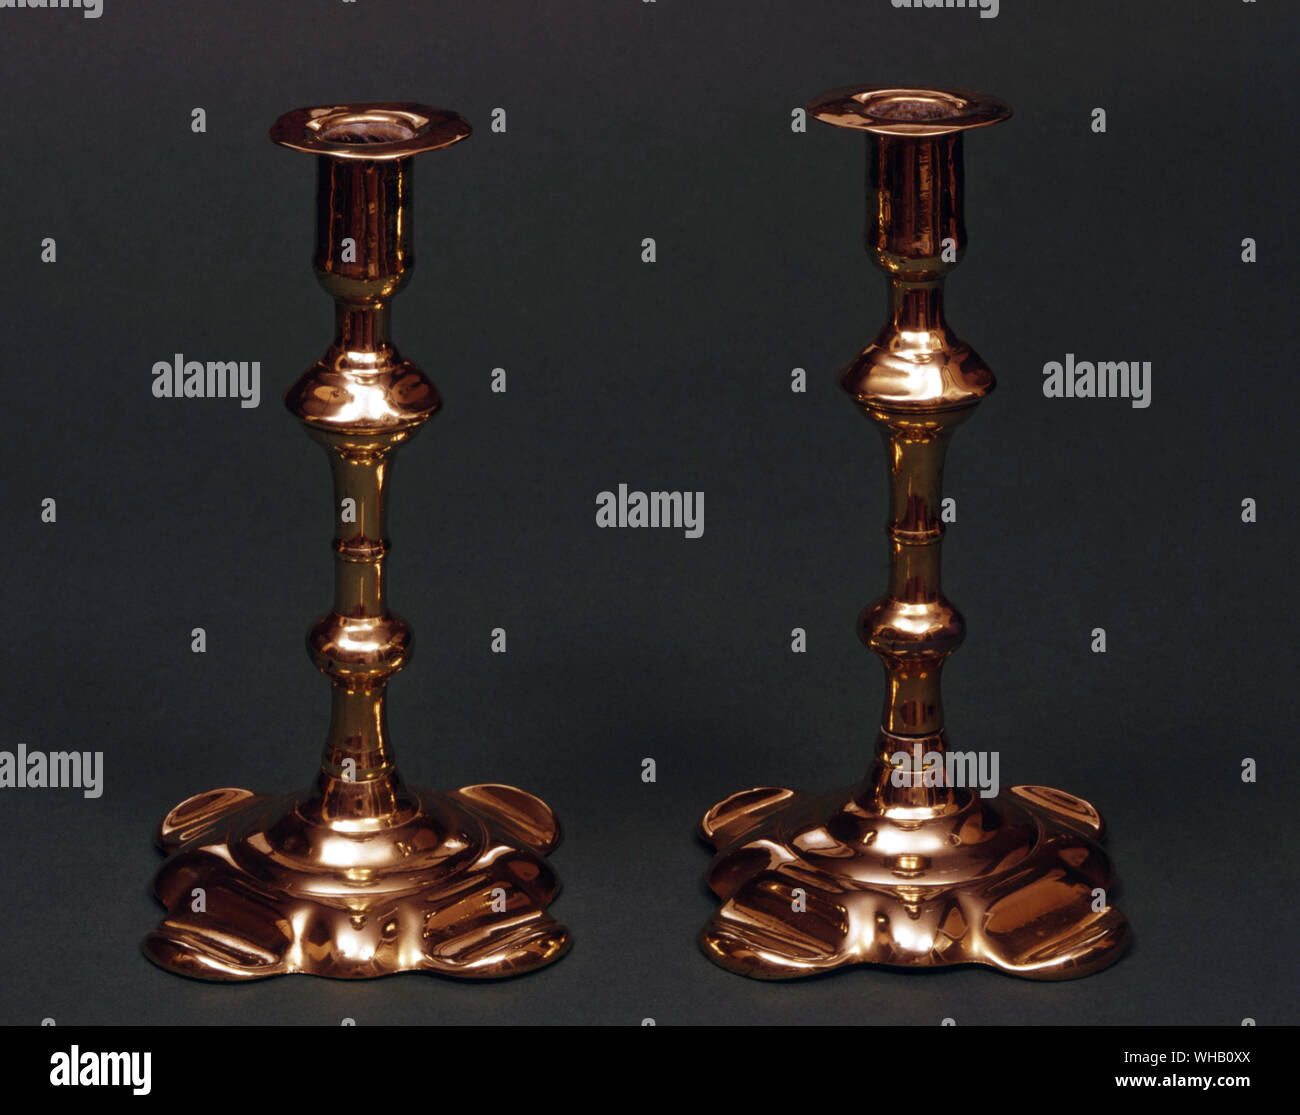 Pair of brass candlesticks by George Grove, English, mid-18th century.. Victoria & Albert Museum, London. Stock Photo